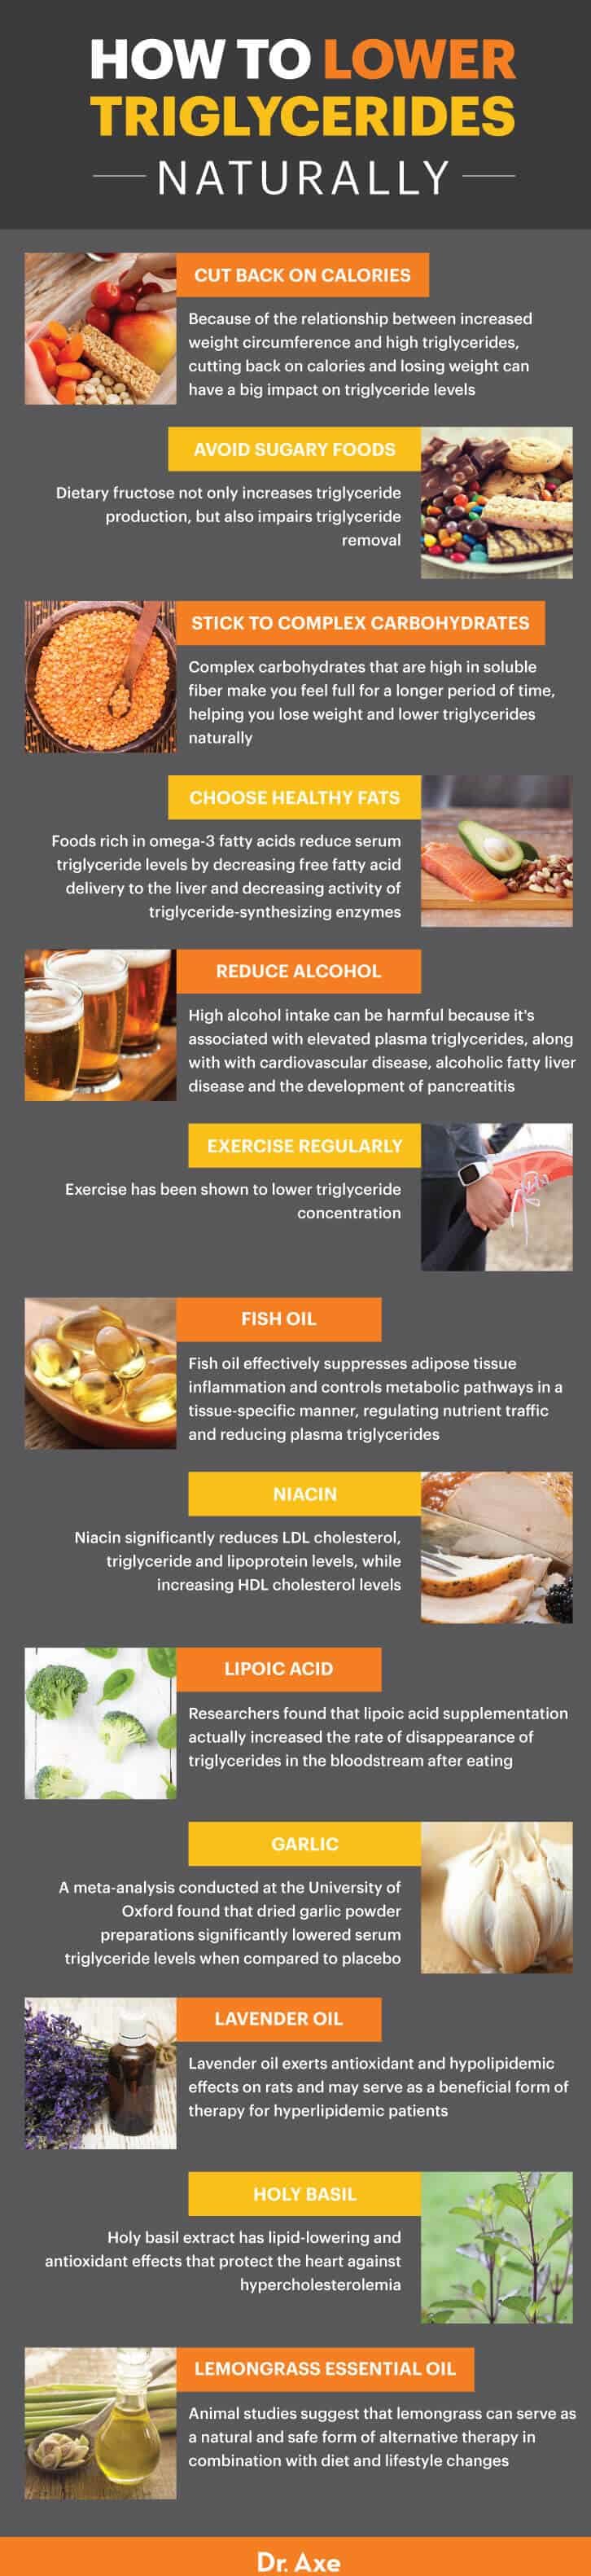 How to lower high triglycerides naturally - Dr. Axe